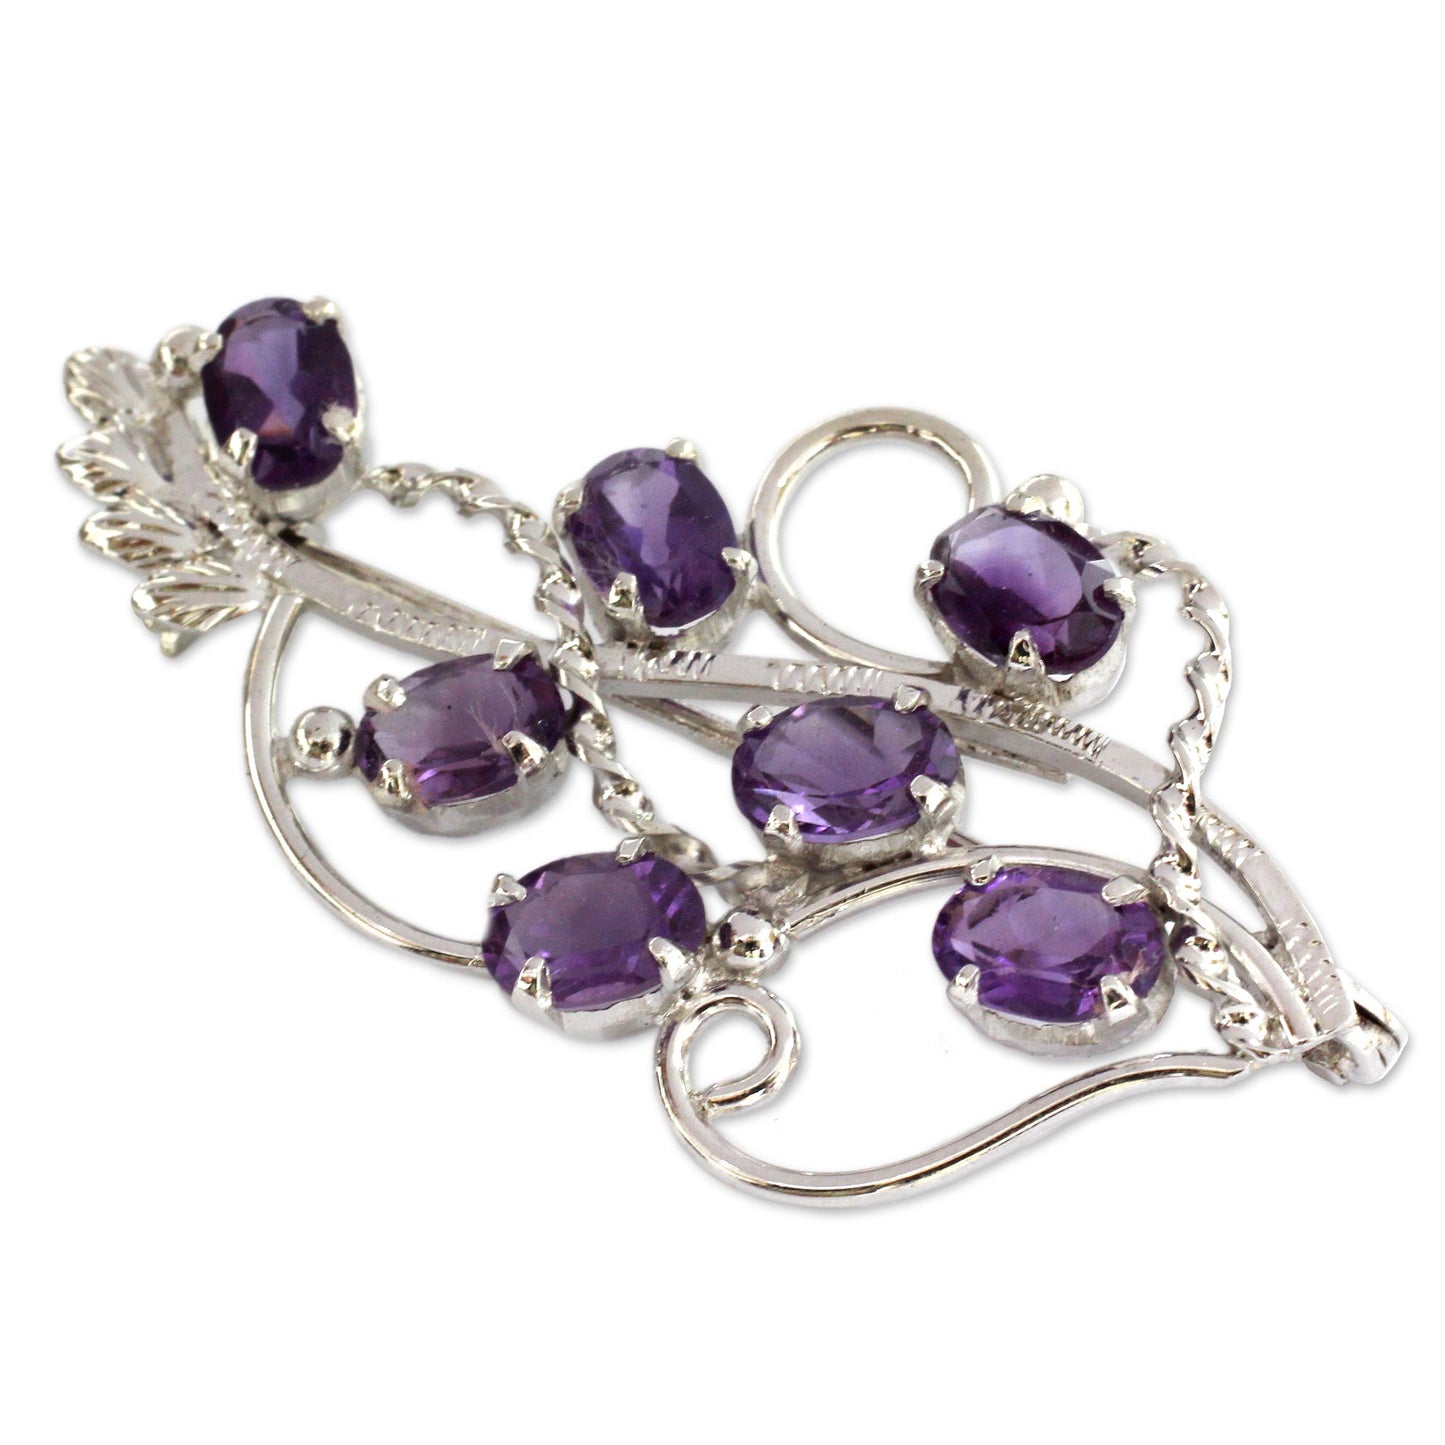 Lilac Story 7 Carats Amethyst Sterling Silver Indian Brooch Pin